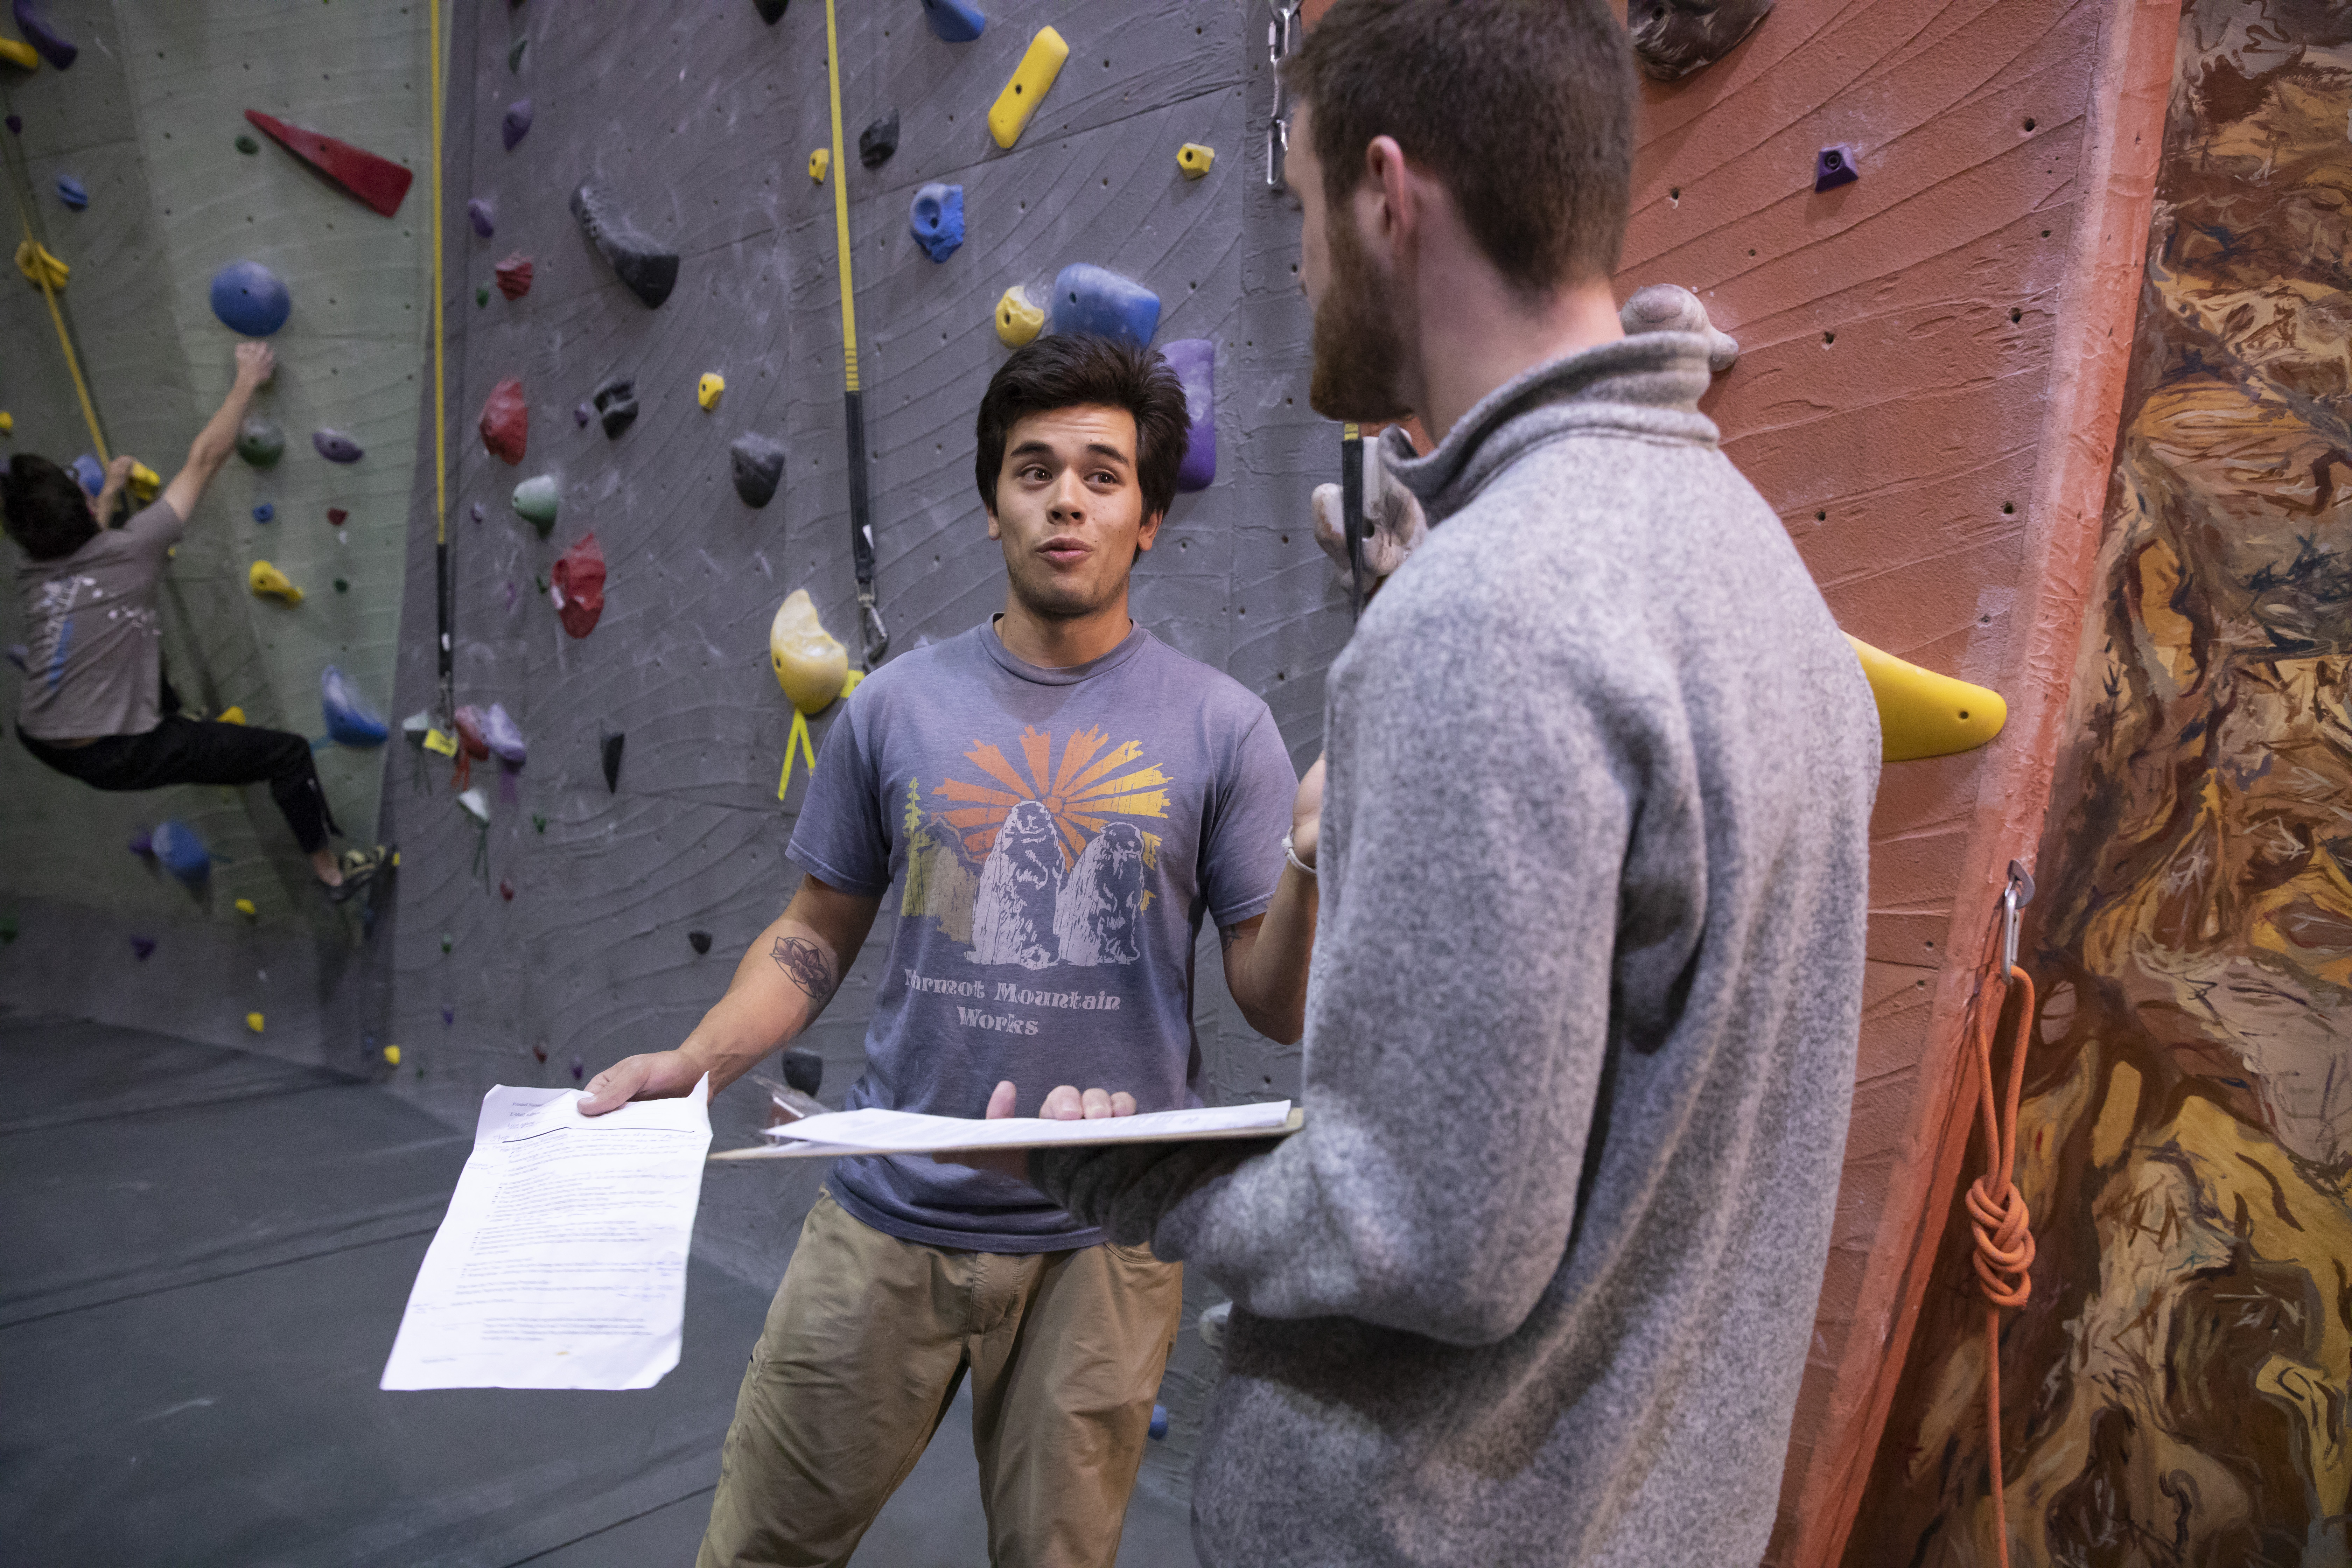 A climbing wall staff goes through the climbing wall orientation process with a student.